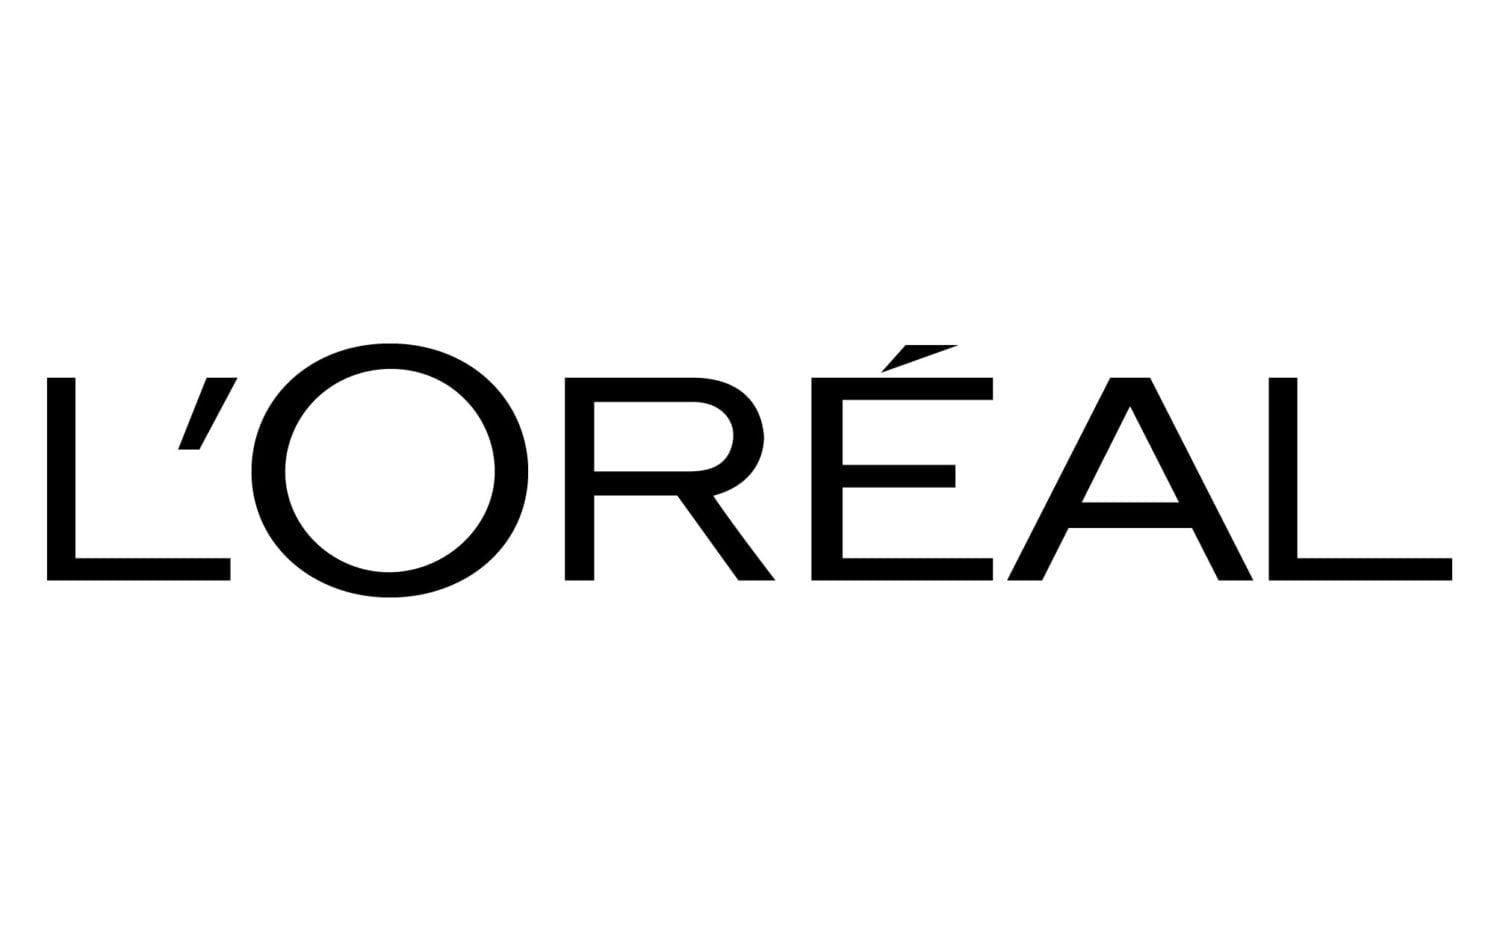 SWOT Analysis for the cosmetic company of L'Oréal